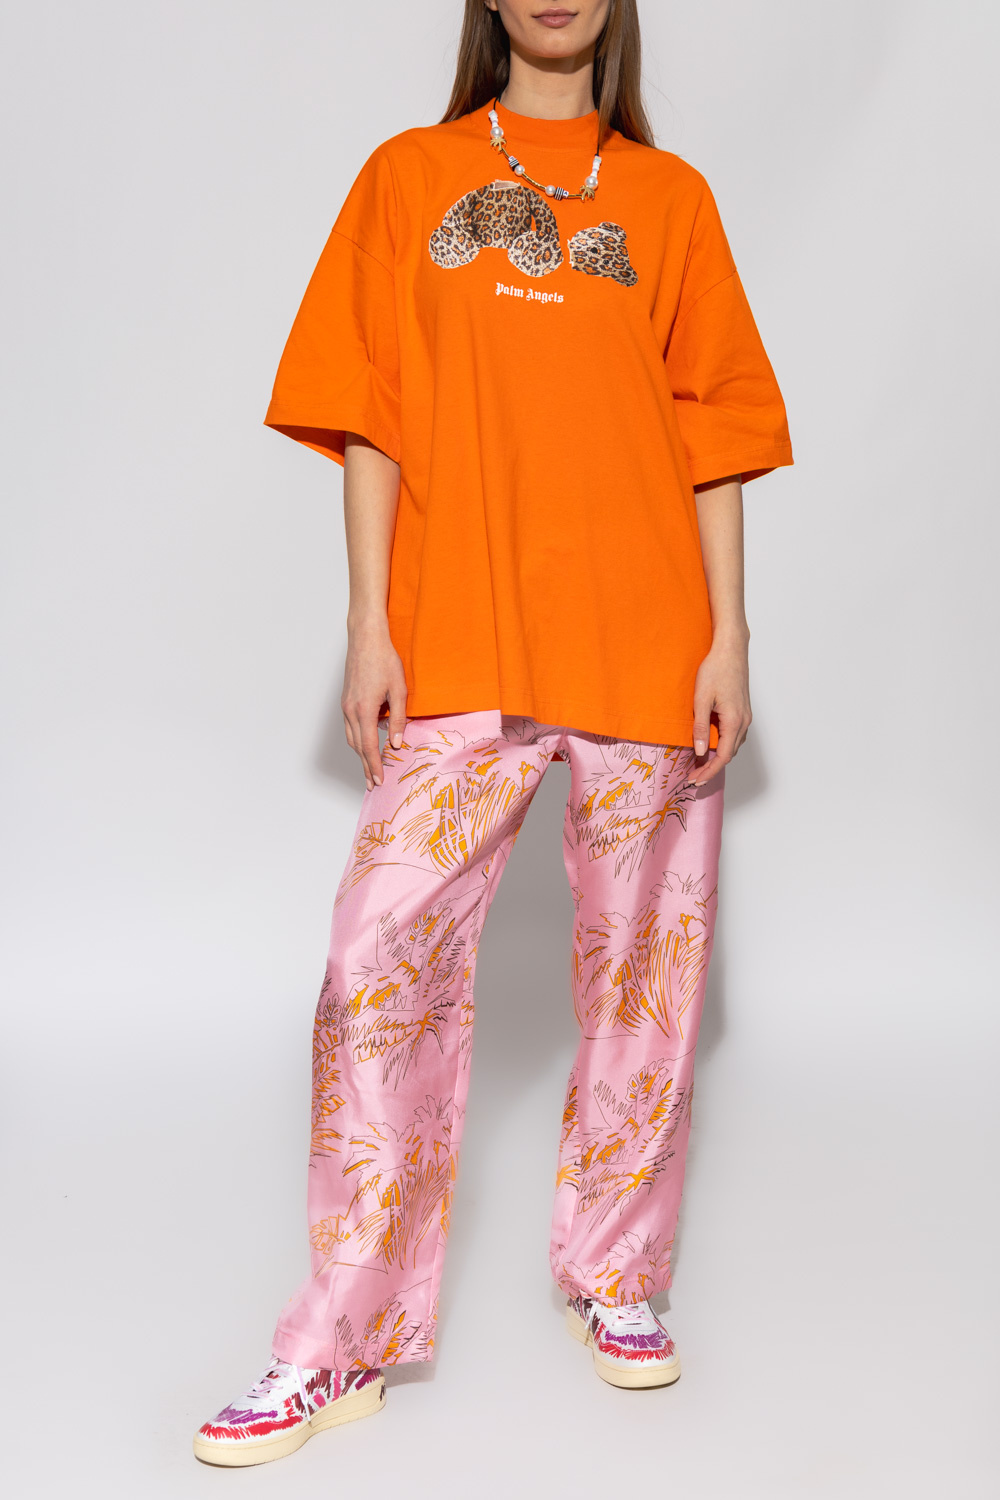 Palm Angels Versace Kids Teen Boy Clothing for Kids